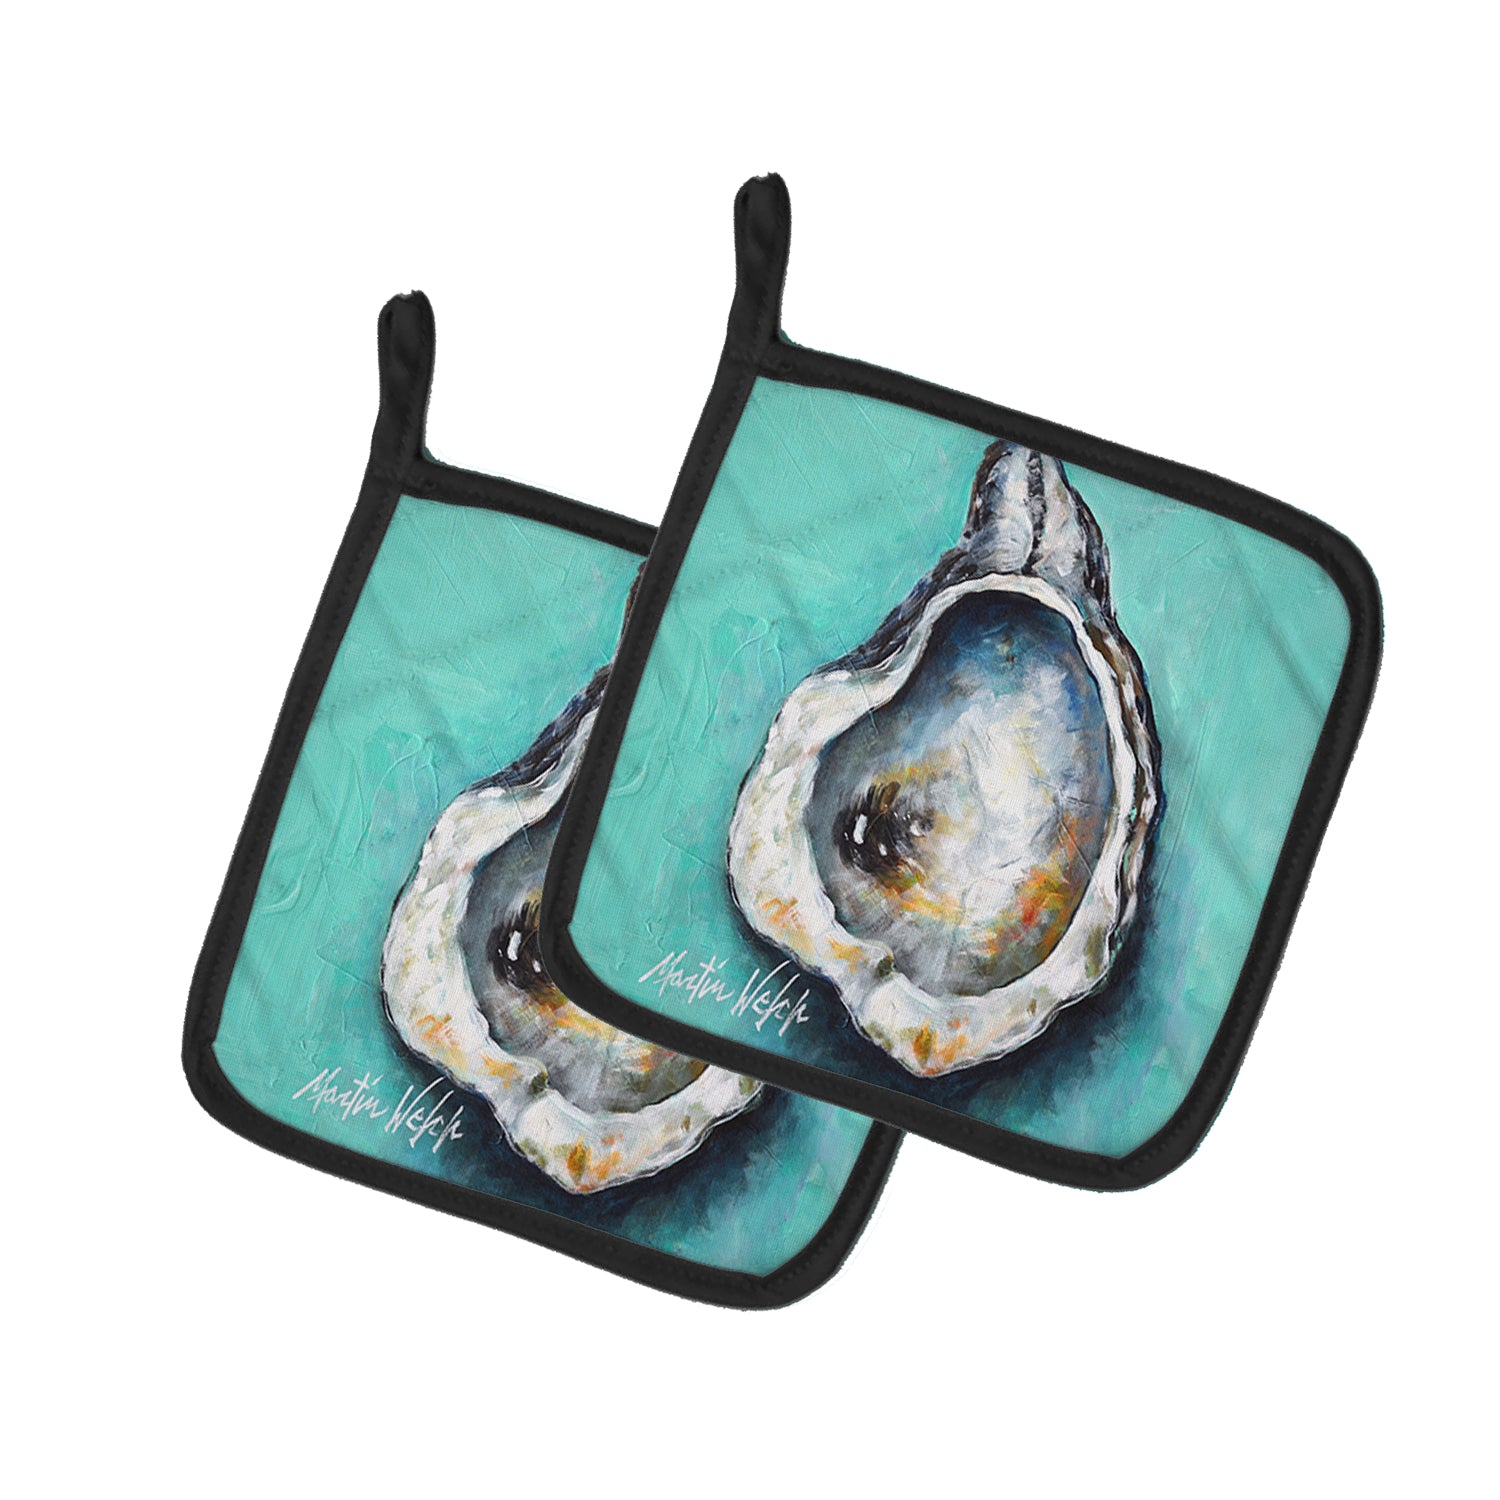 Buy this Aqua Pearl Oyster Pair of Pot Holders